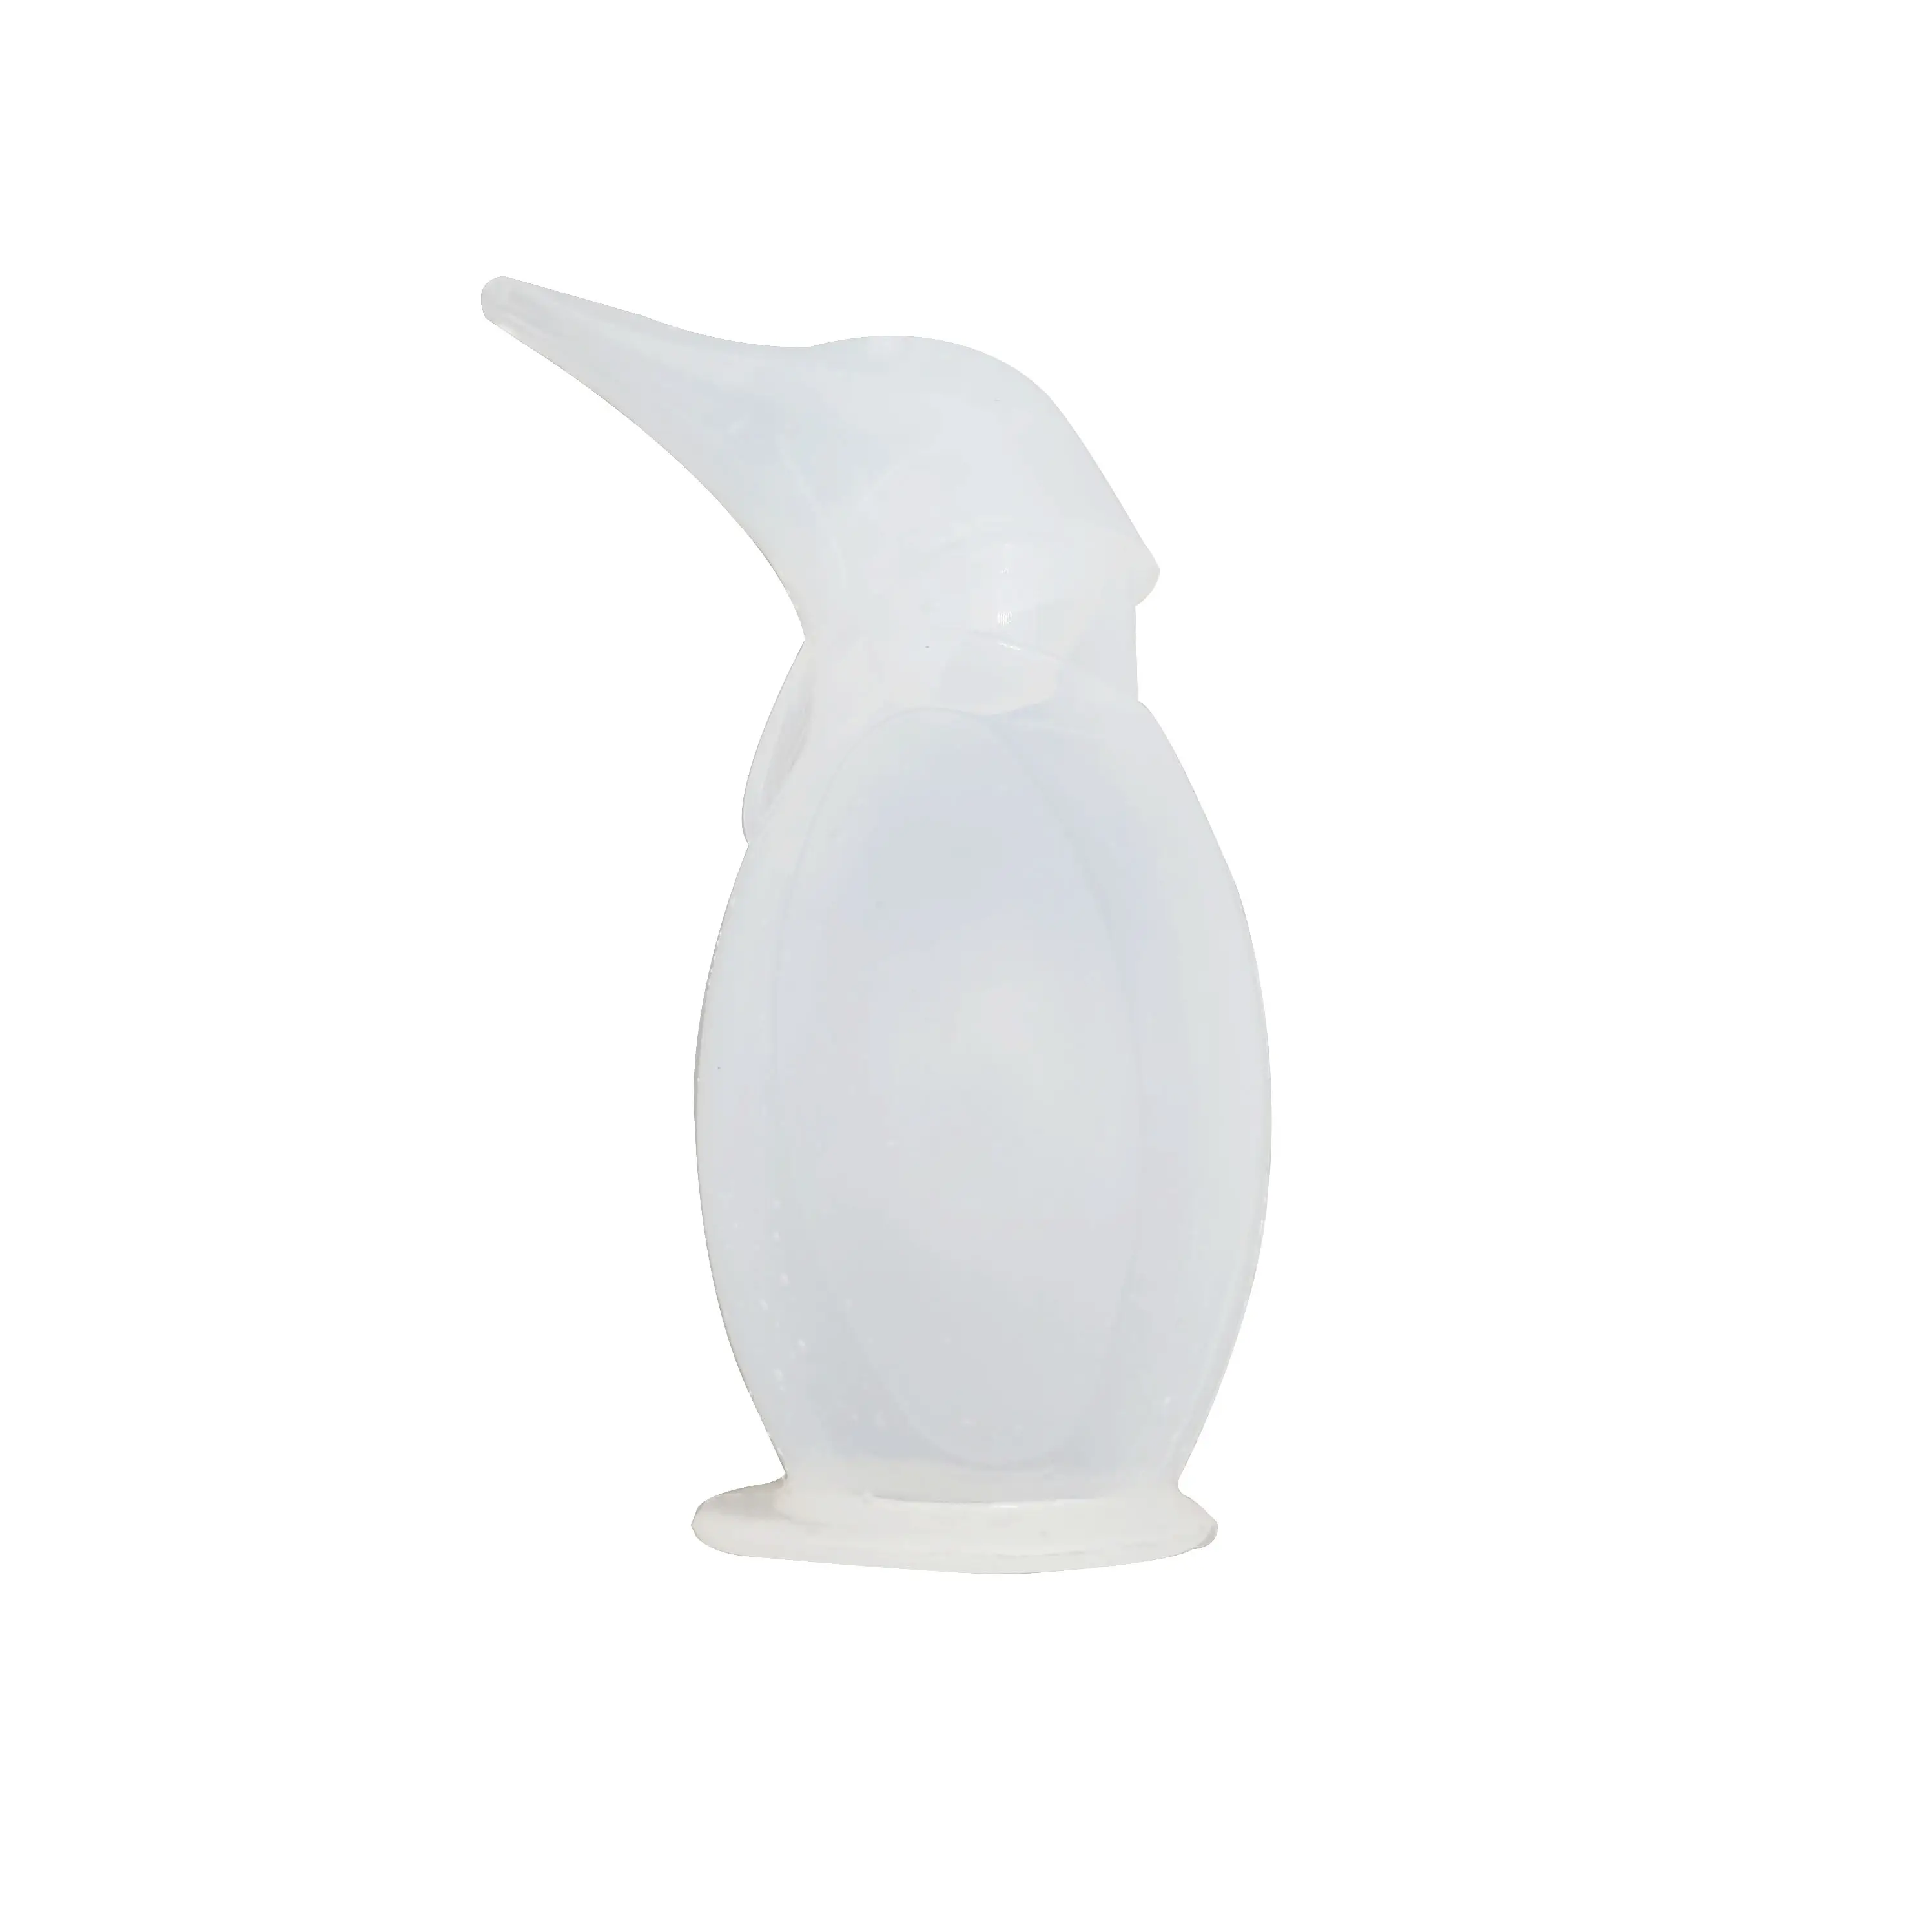 Silicone penguin nose aspirator Babies suck their boogers and snot Baby booger cleaner for newborn babies